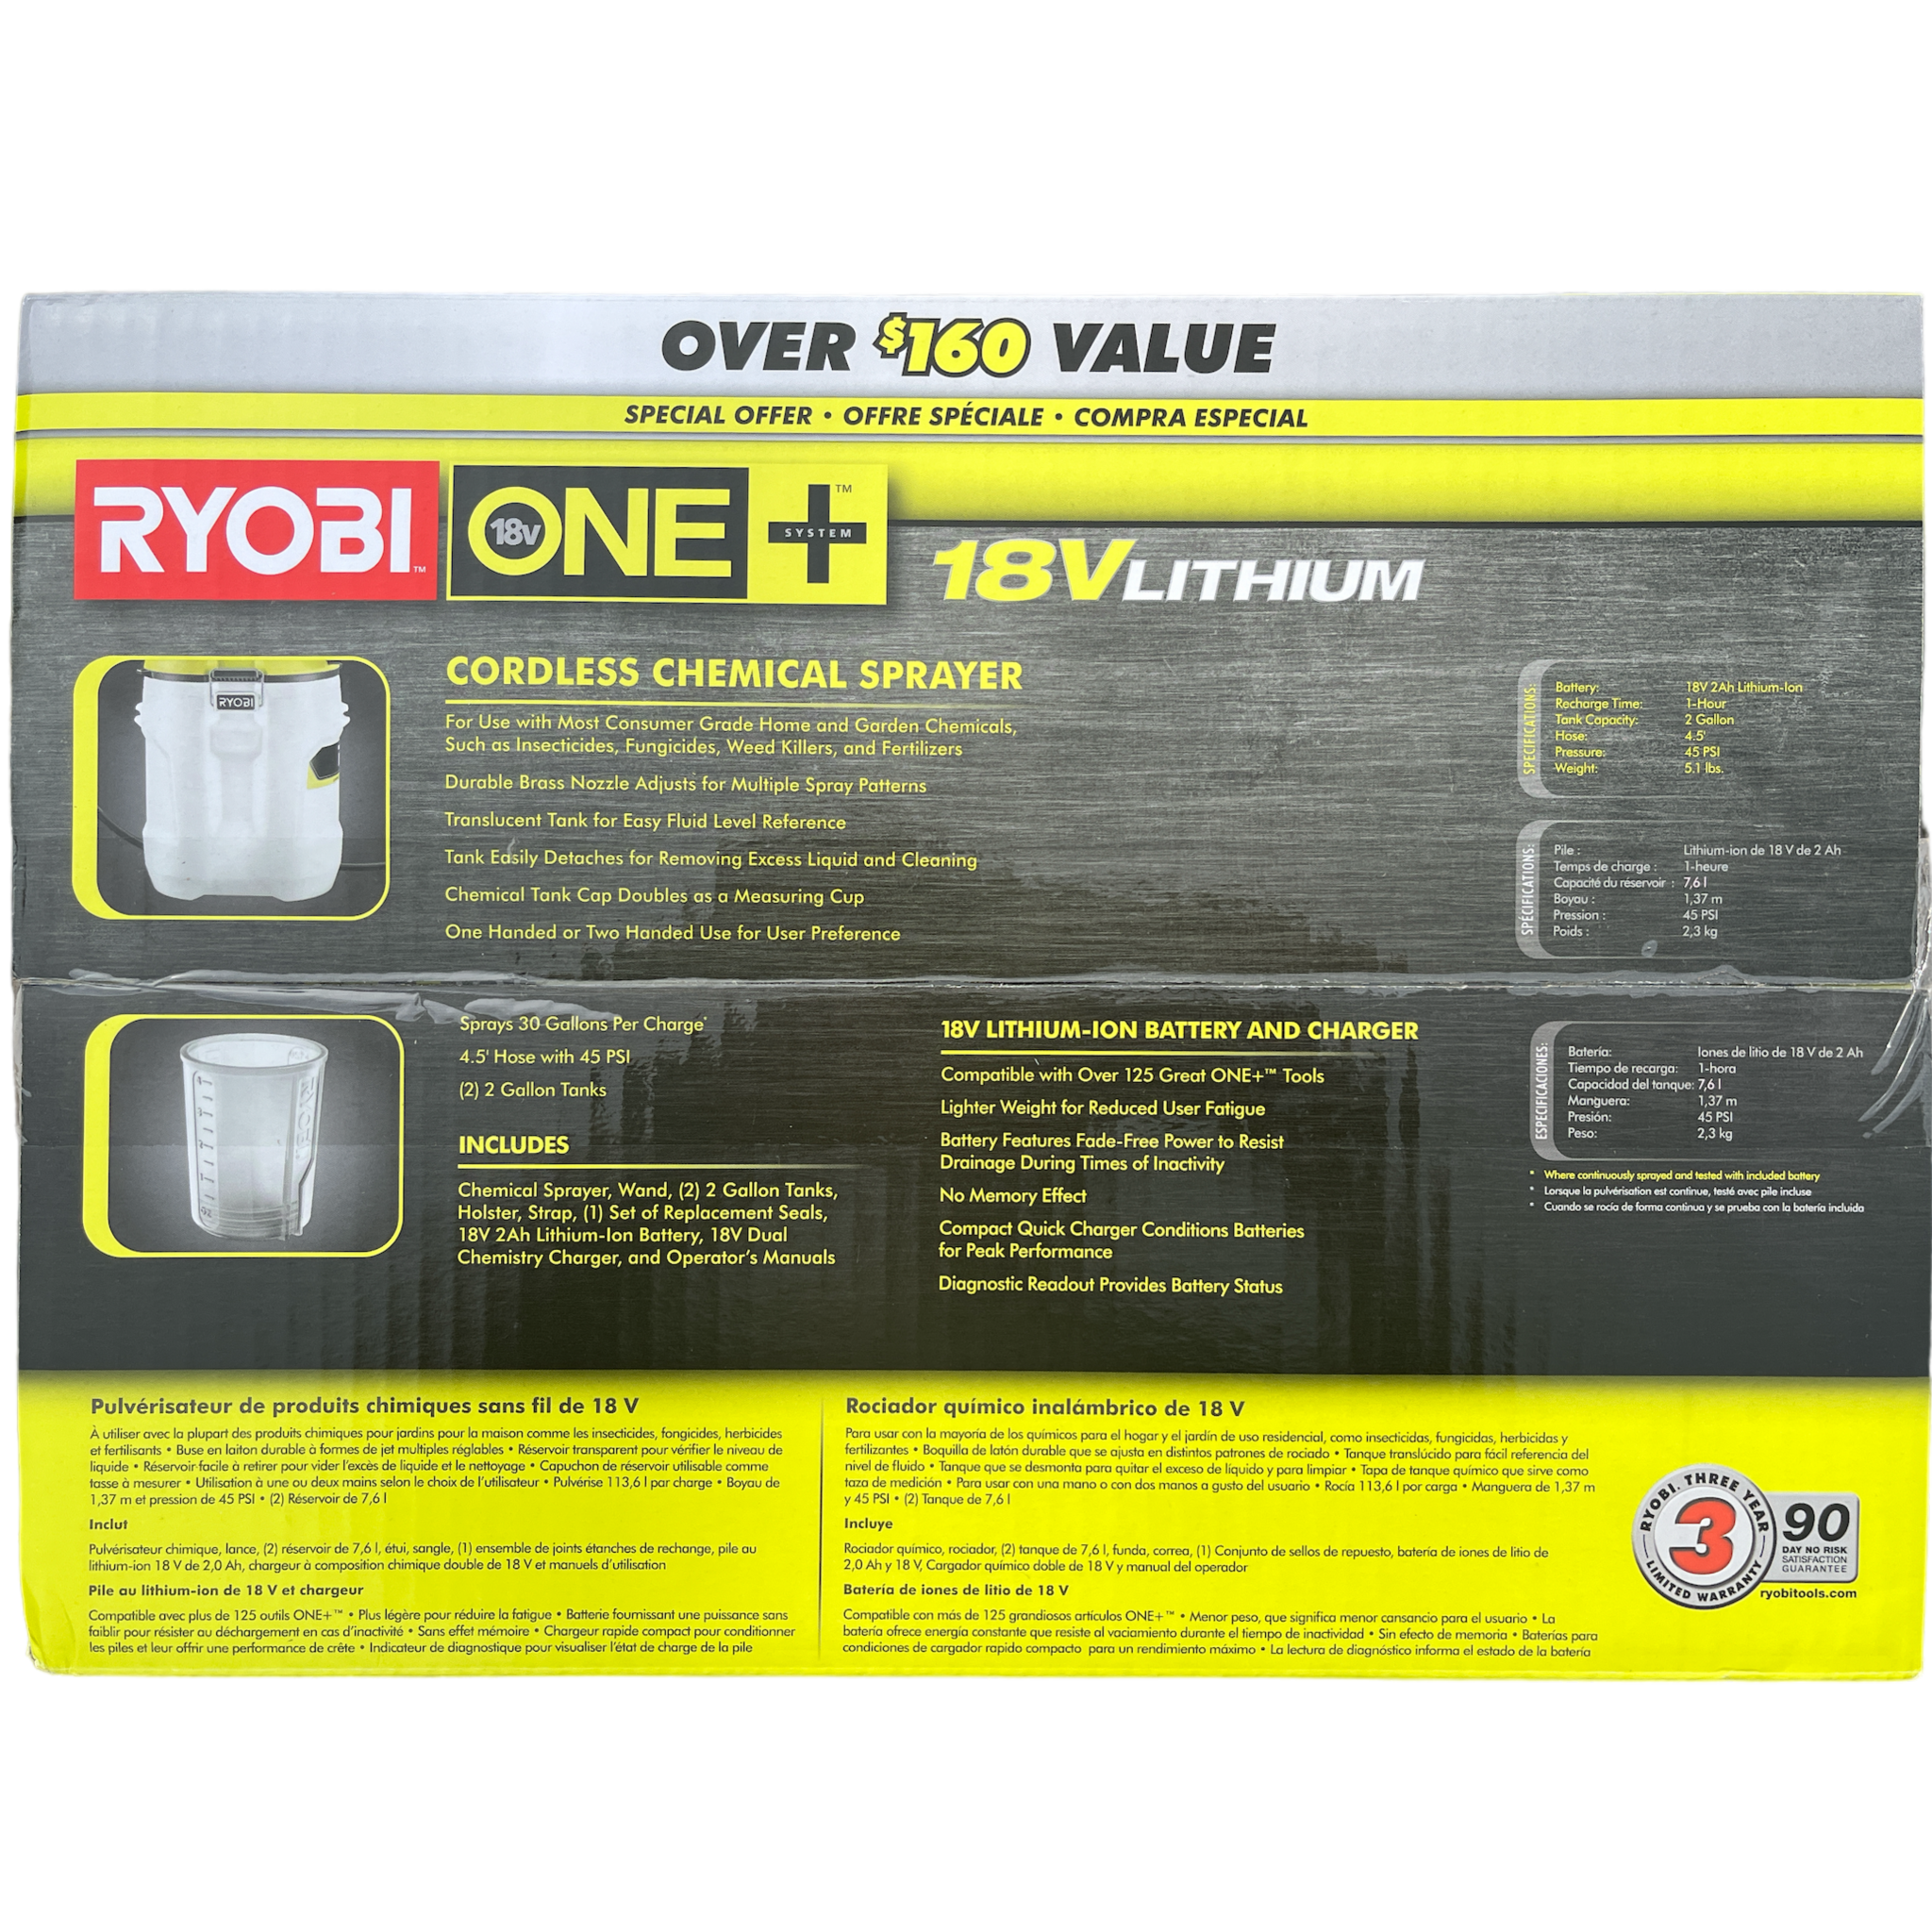 Ryobi One+ 18-Volt Lithium-Ion Cordless 2 gal. Chemical Sprayer with 2.0 Ah Battery